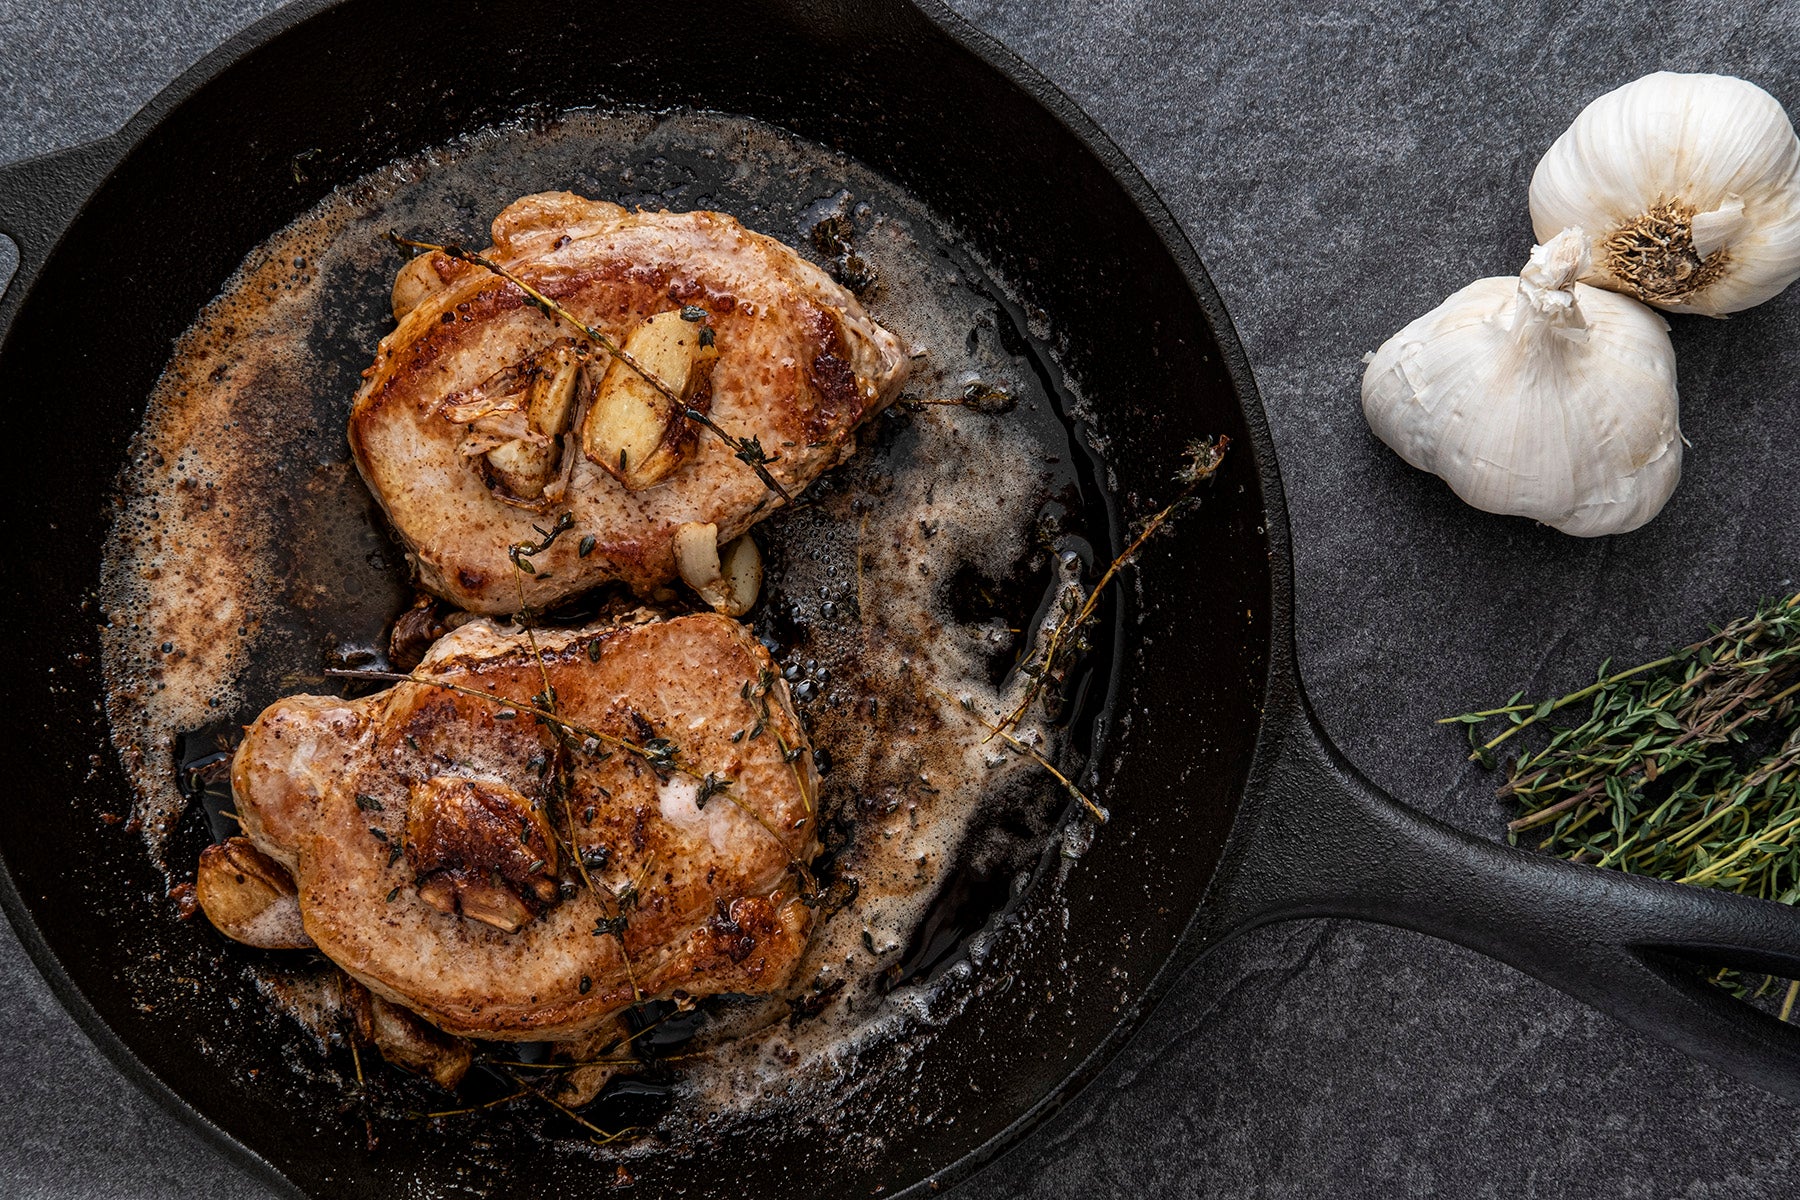 Two perfectly browned thick cut pork chops are shown in a cast iron skillet with roasted garlic cloves and herbs on top.